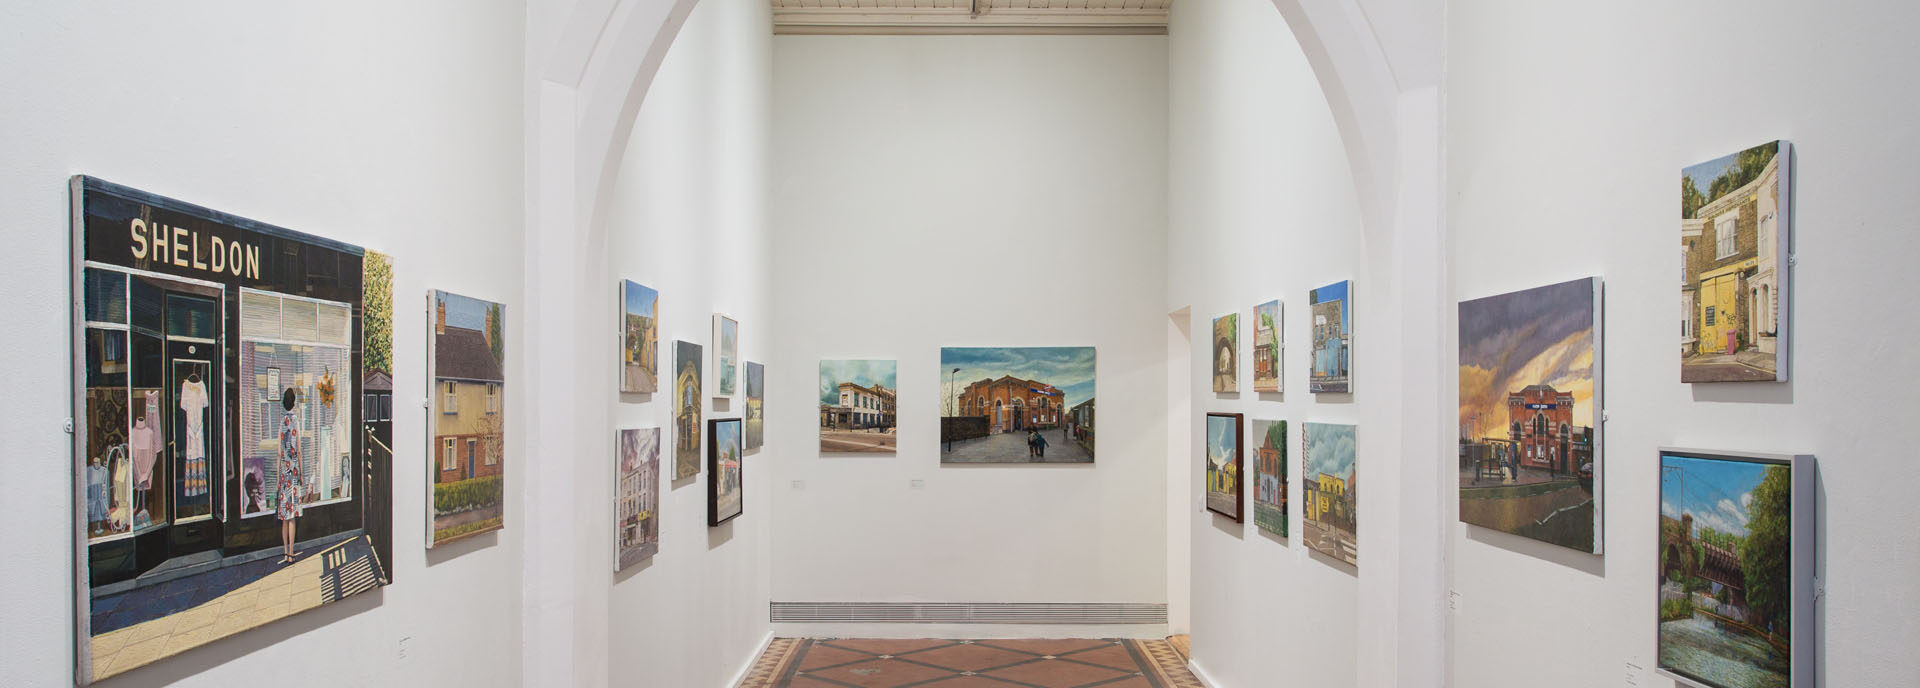 The nave space of the Nunnery Gallery featuring paintings by Doreen Fletcher of east London streets and buildings